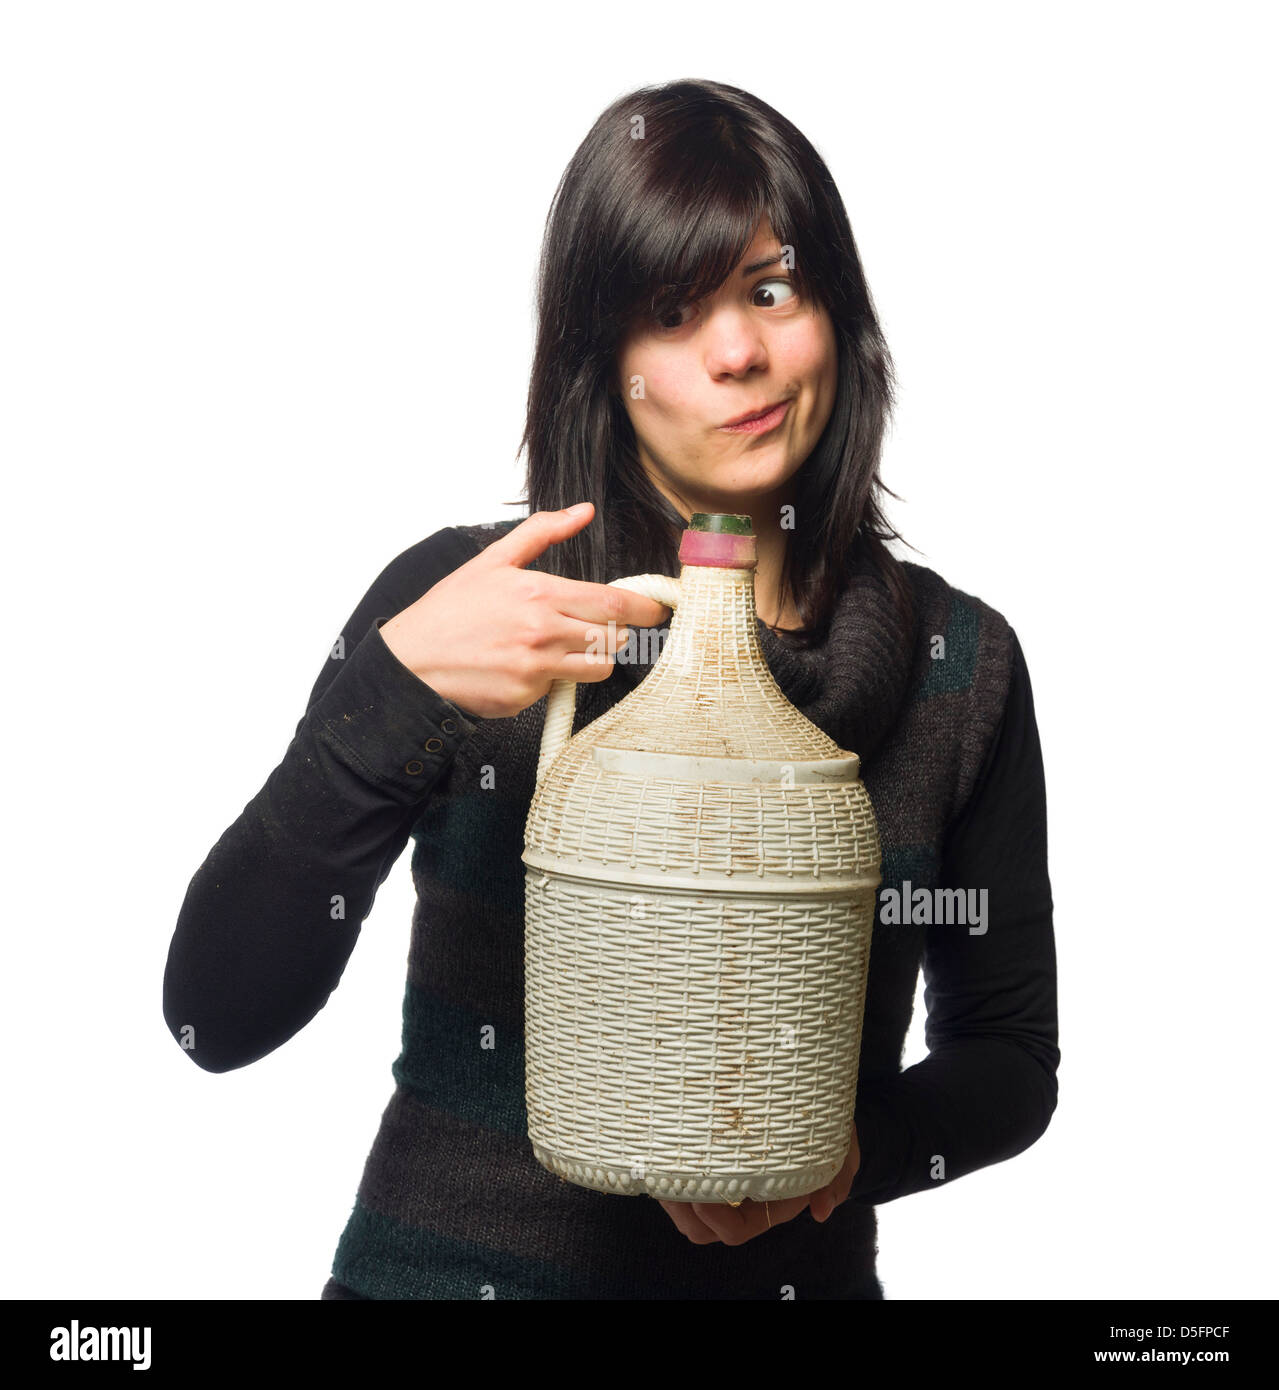 Drunk woman smiling while holding wine carboy and making a funny face isolated on white background Stock Photo